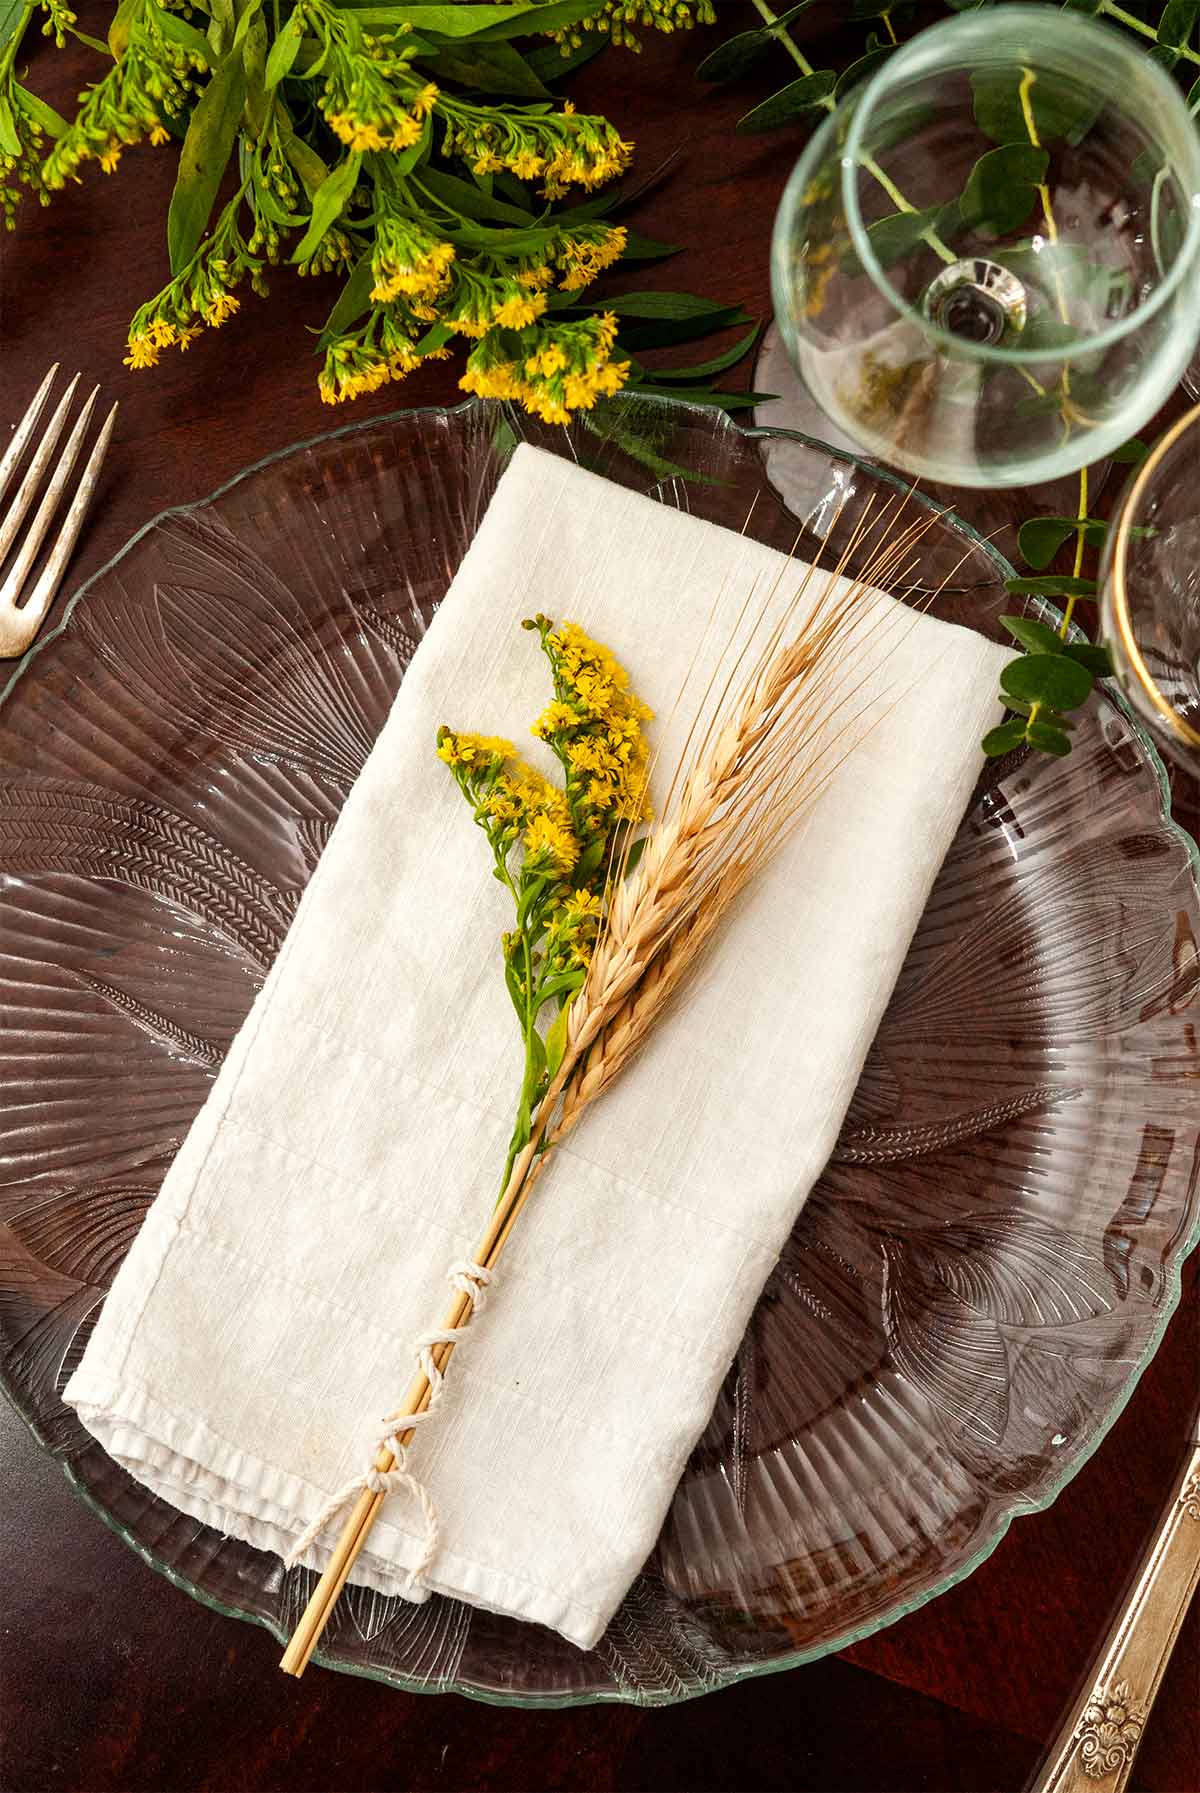 A small bundle of goldenrod and wheat on a napkin on a plate on a table with glasses.